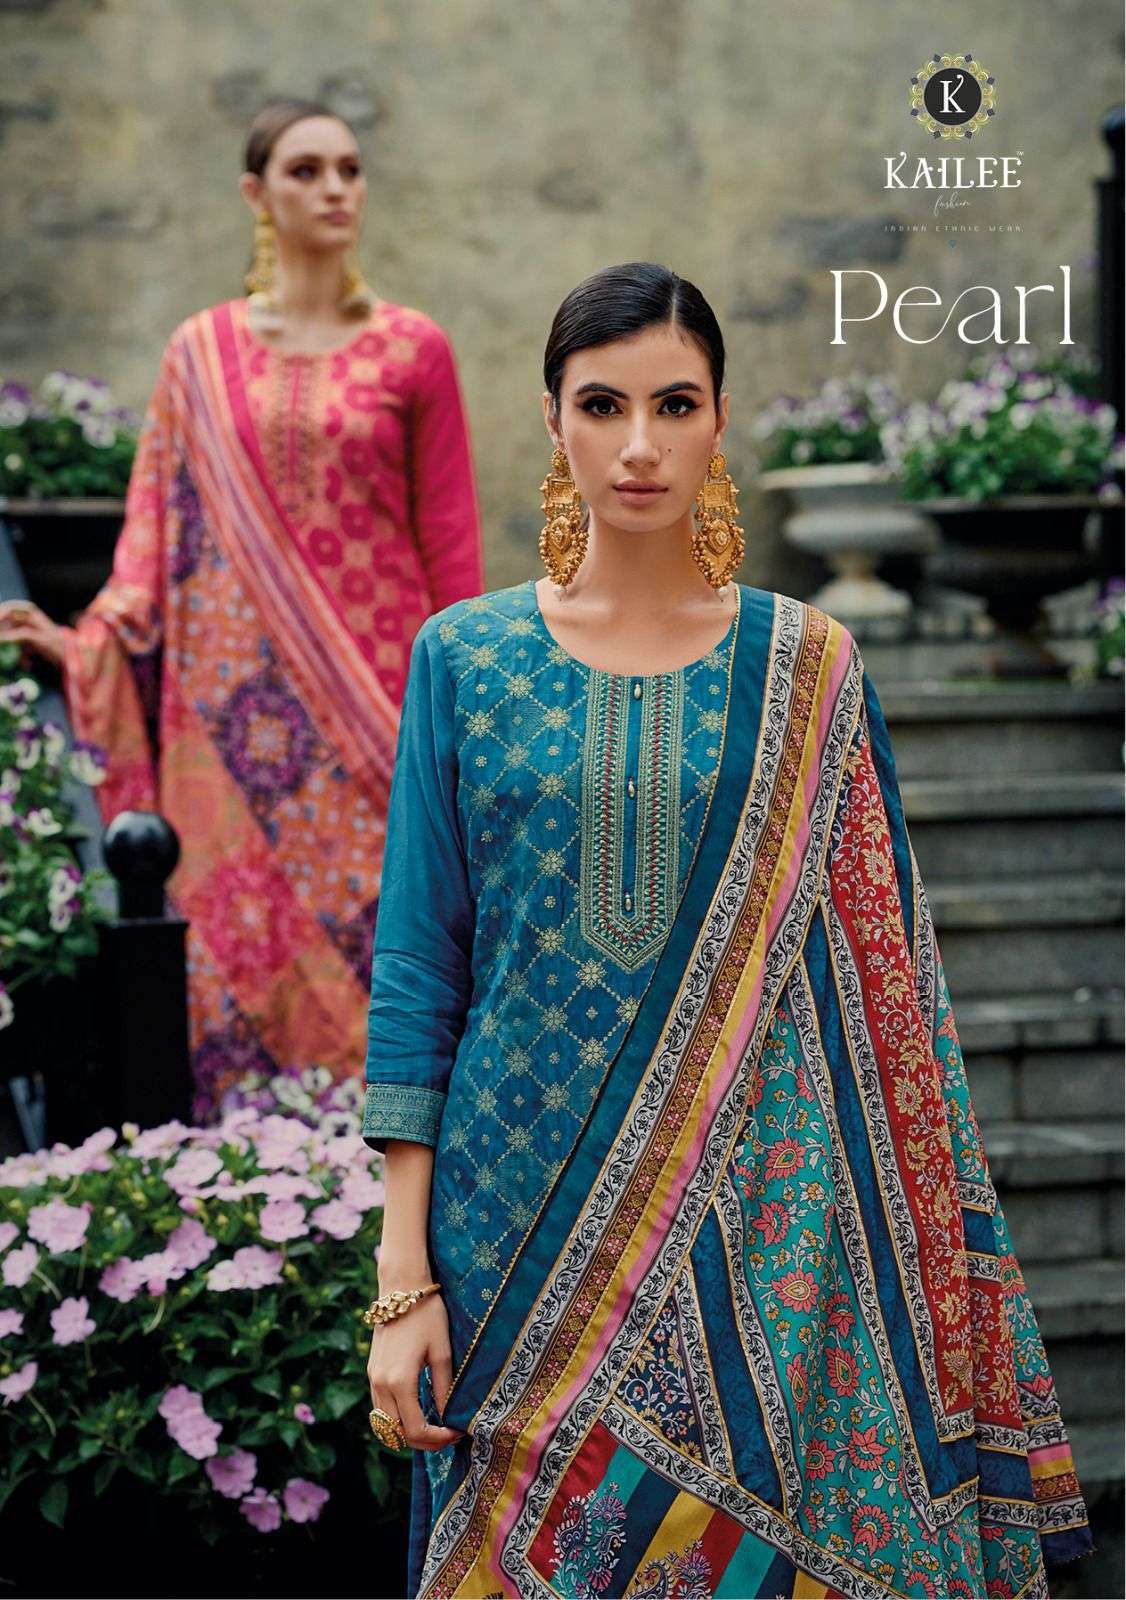 KAILEE FASHION PRESENTS PEARL PREMIUM FESTIVE WEAR READYMADE KURTIS CATALOG WHOLESALER AND EXPORTER IN SURAT